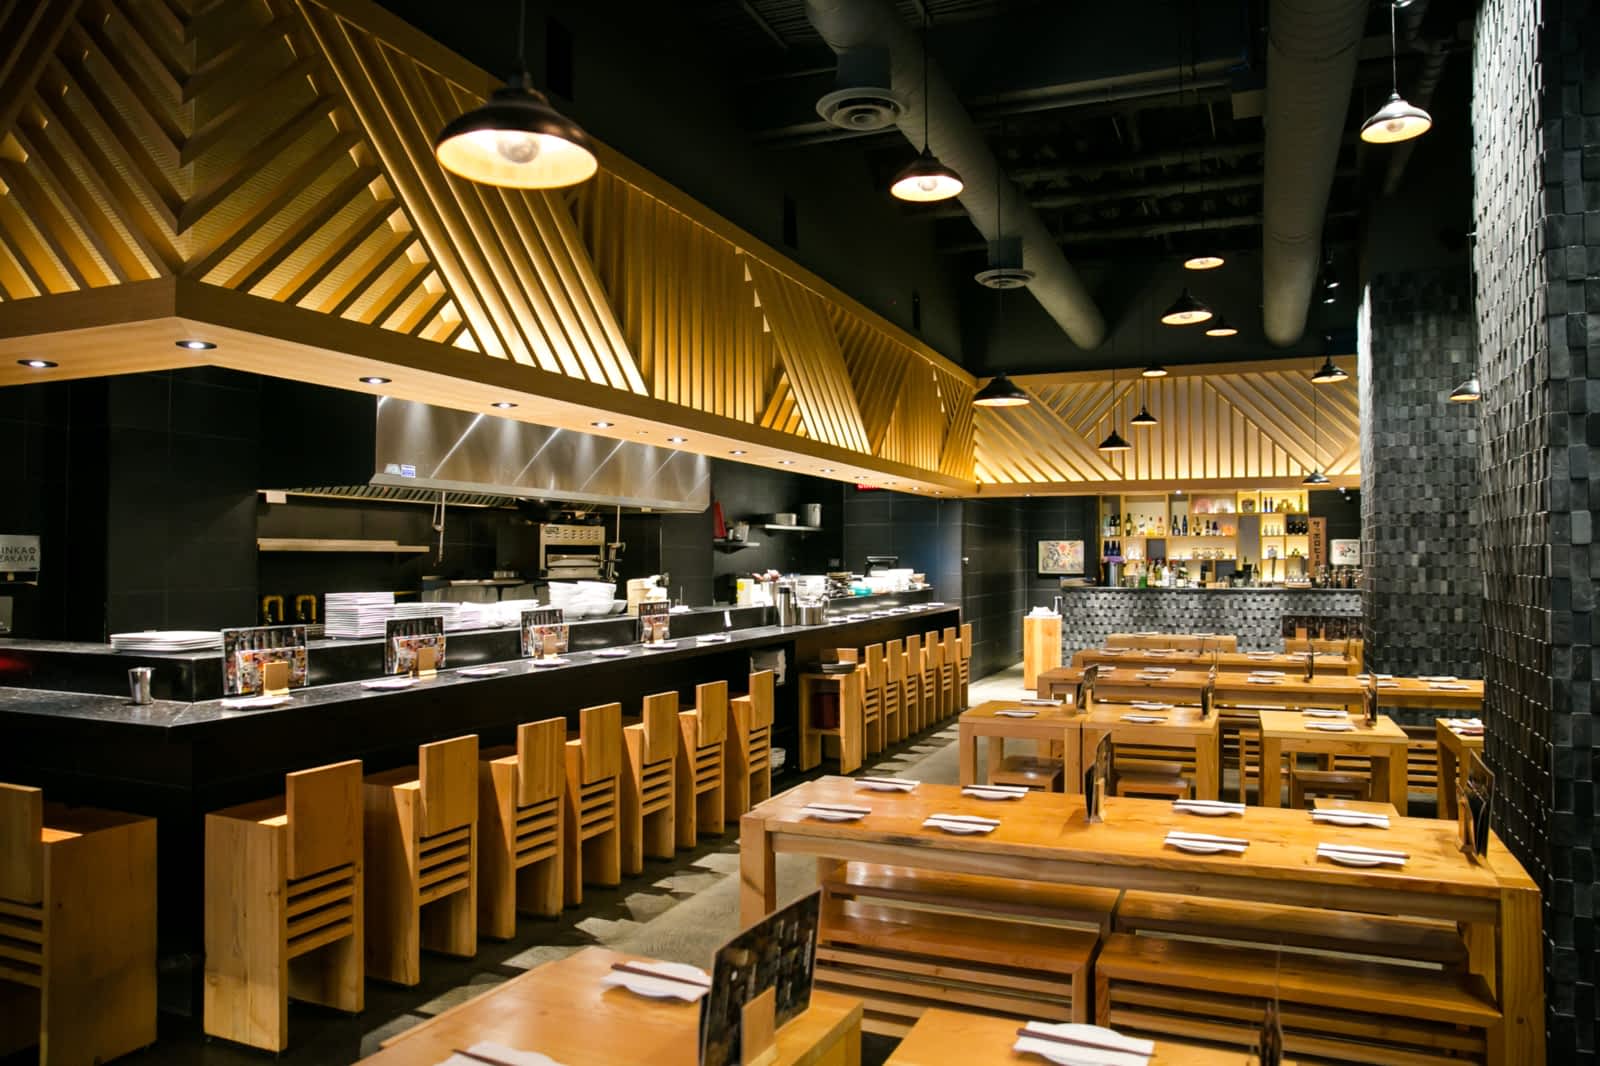 Modern Japanese restaurant featuring bar seating and an open kitchen as well as dining tables